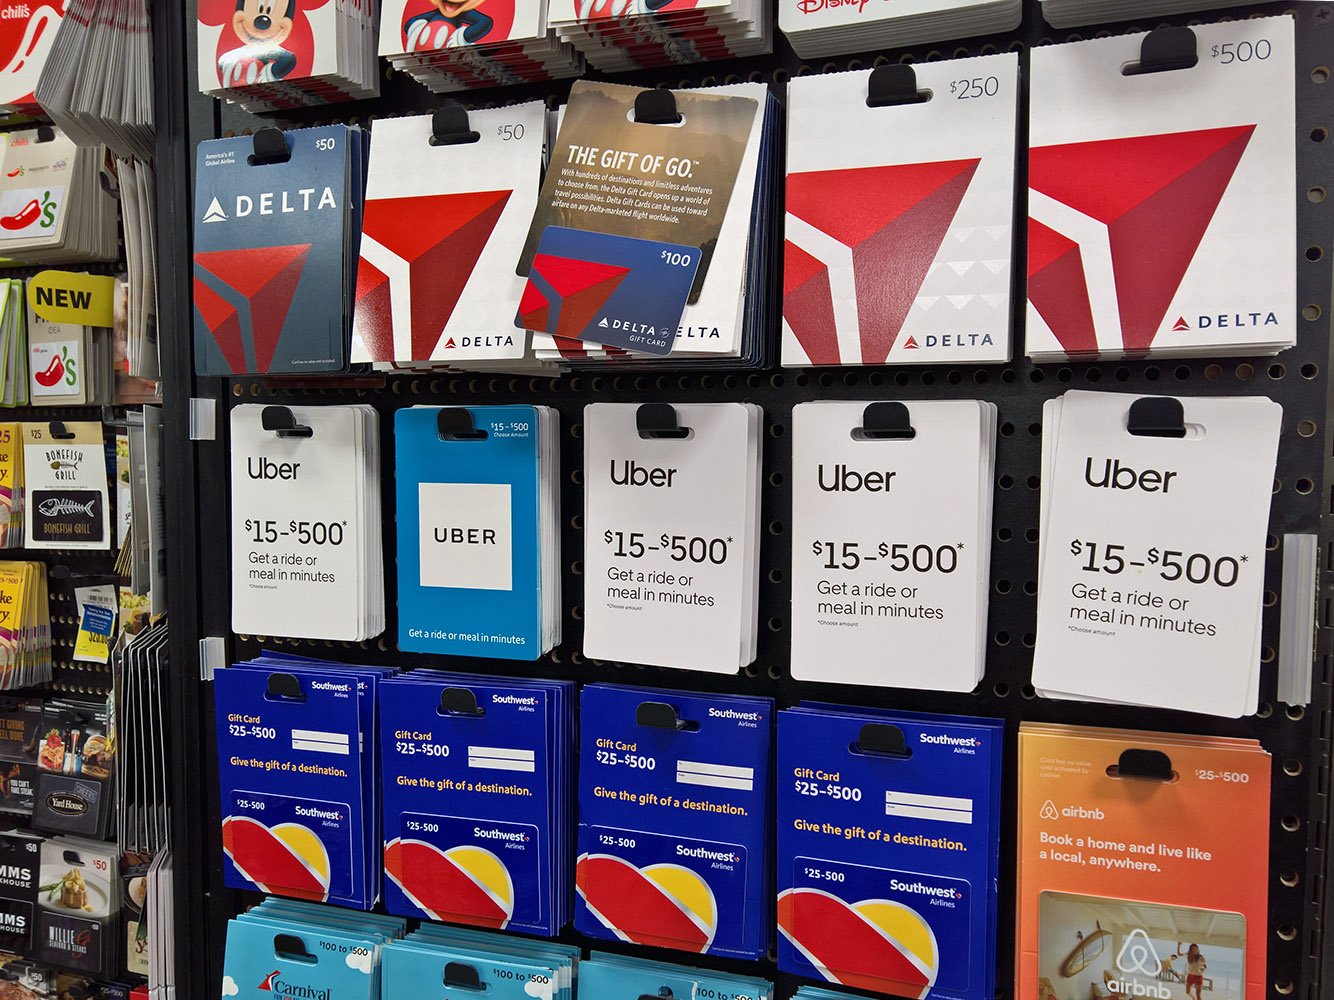 Save money by buying airline gift cards at the grocery store